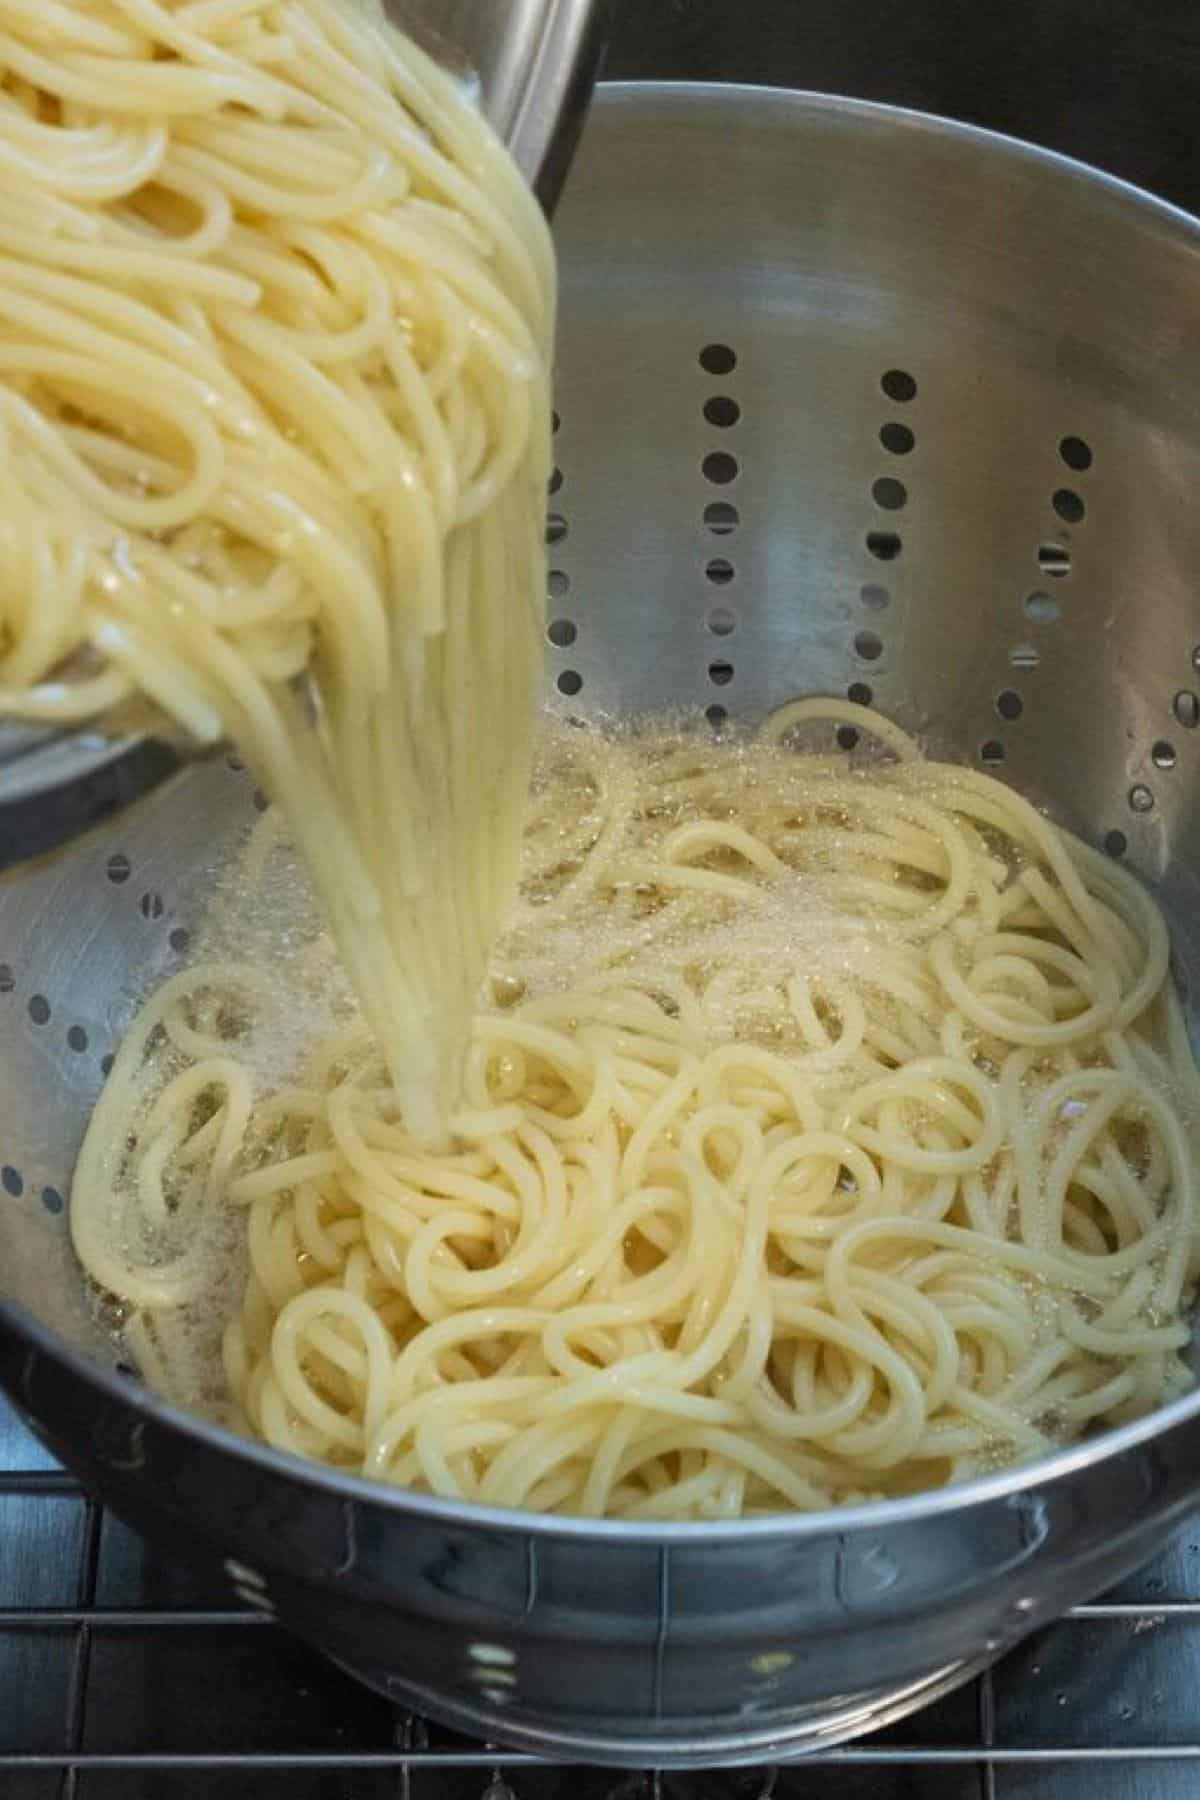 Spaghetti being drained in a colander.